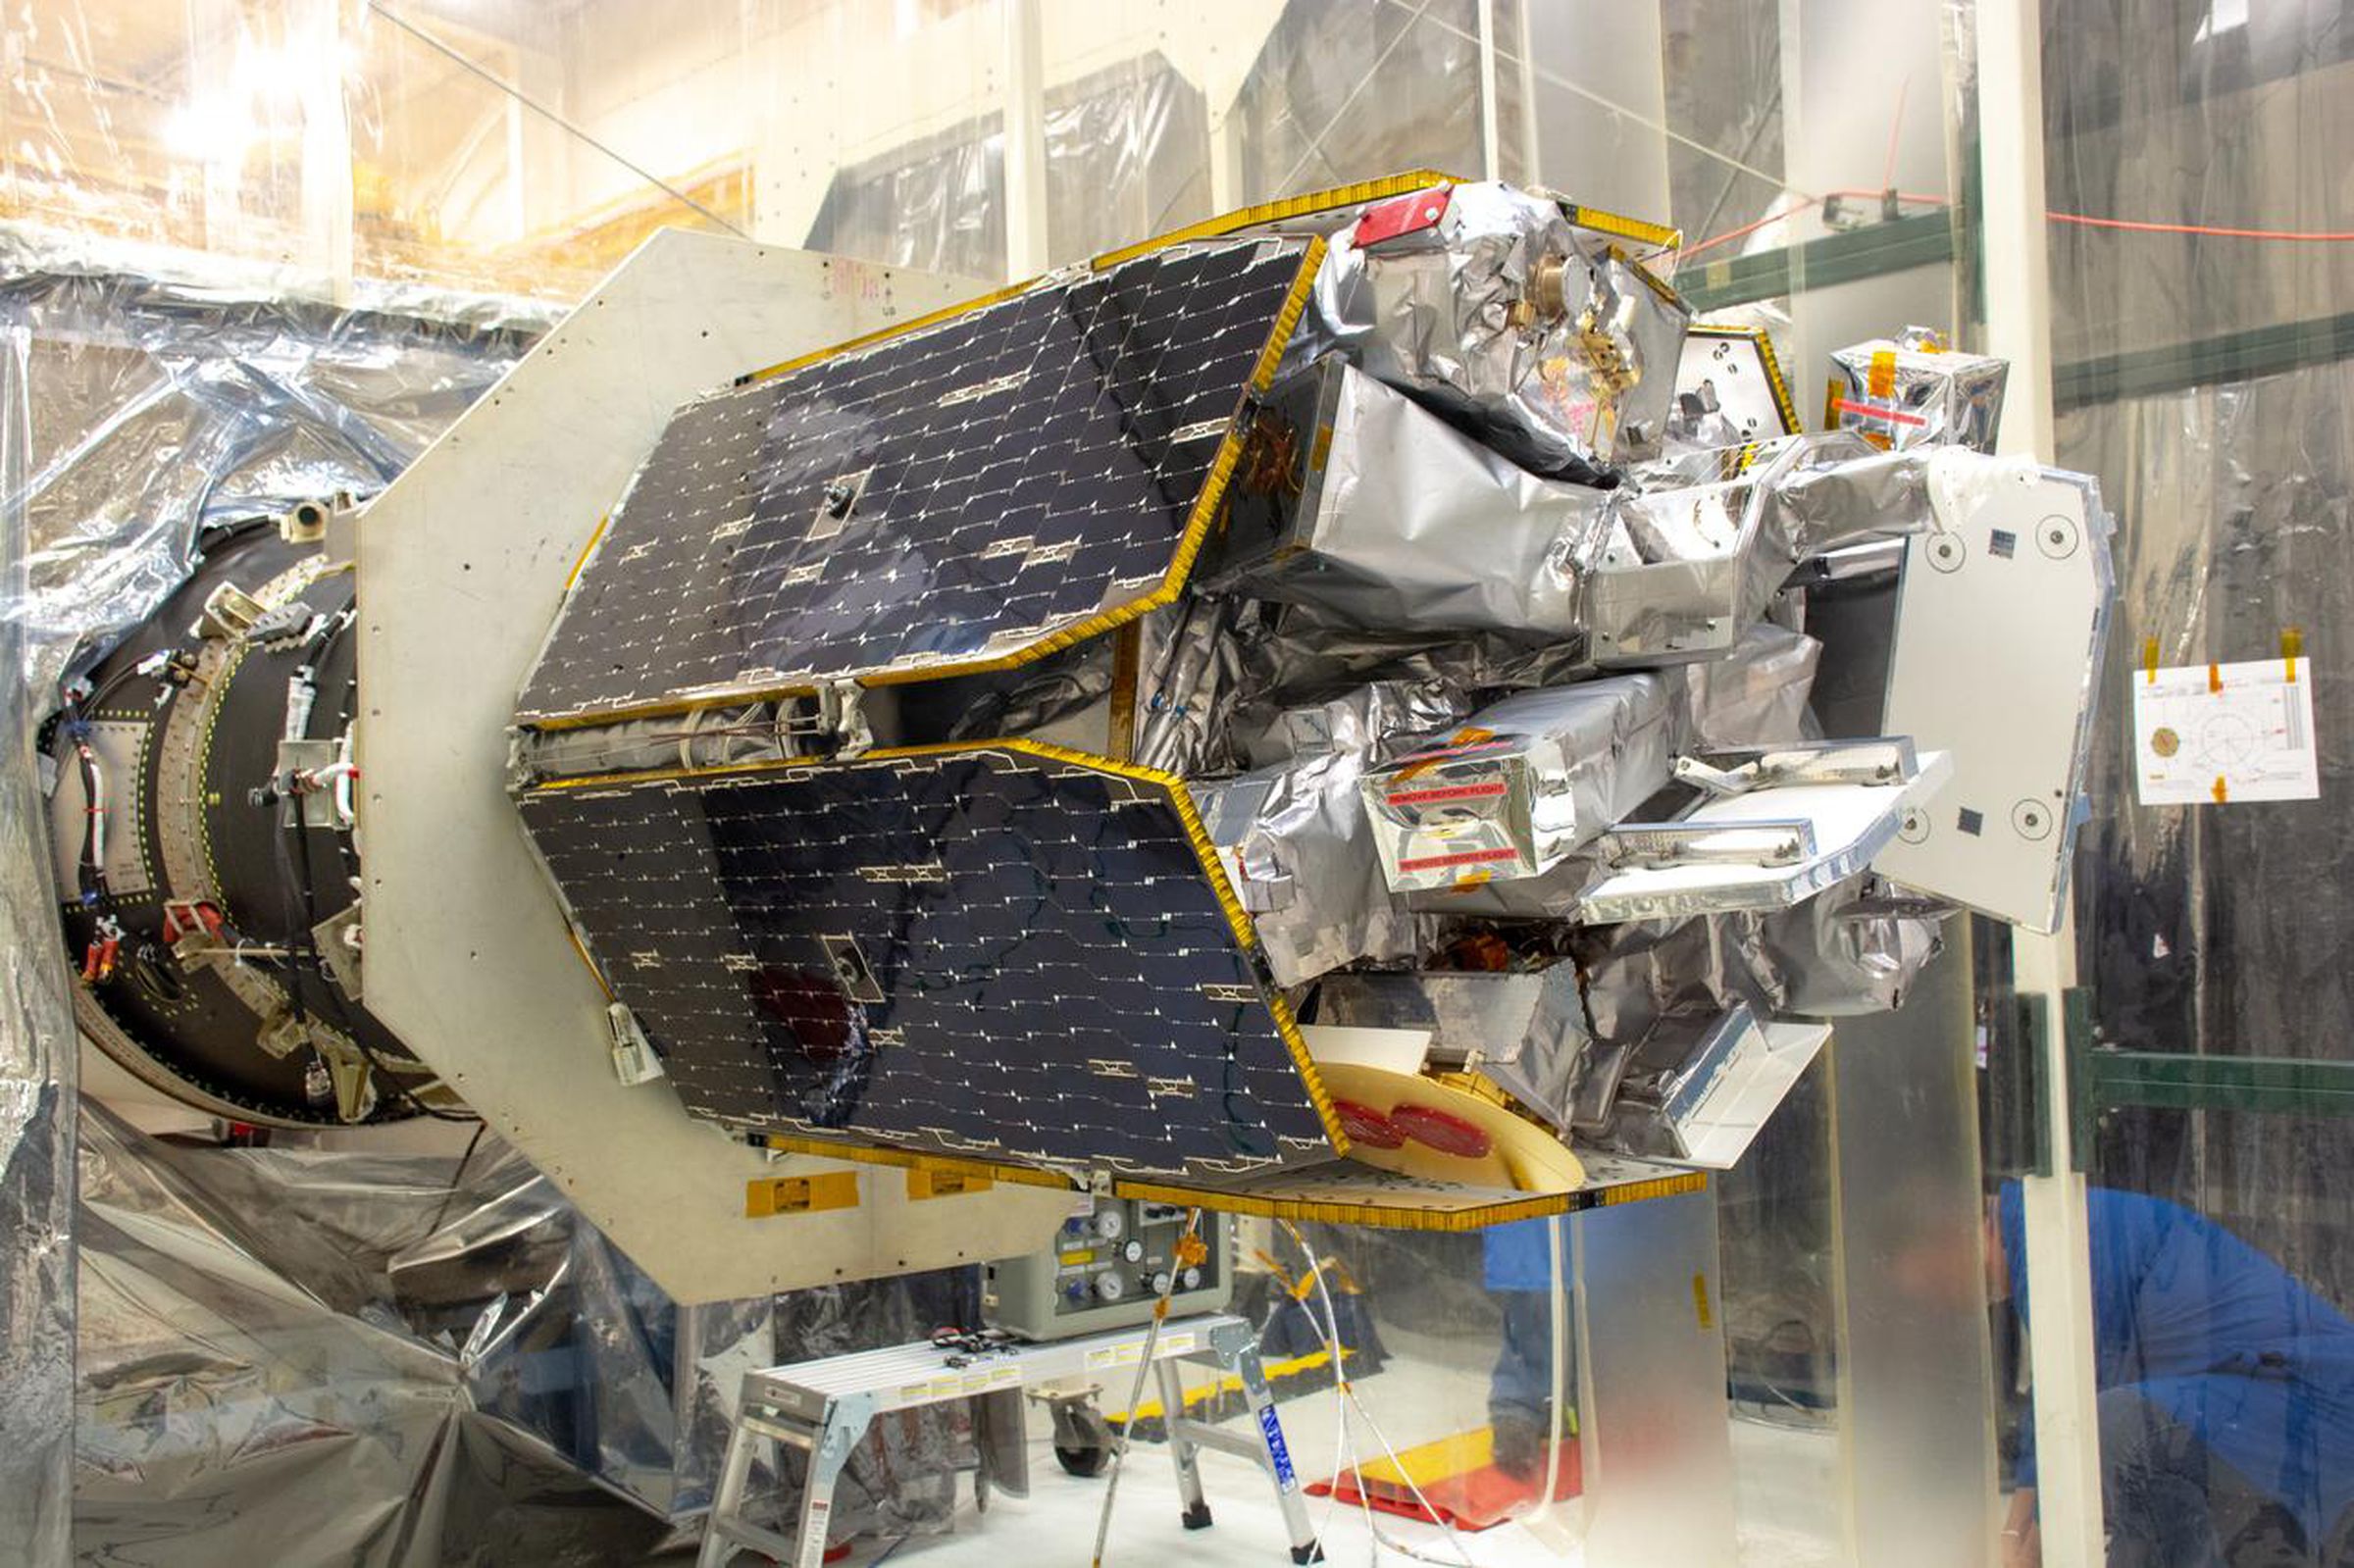 The ICON spacecraft prior to launch.